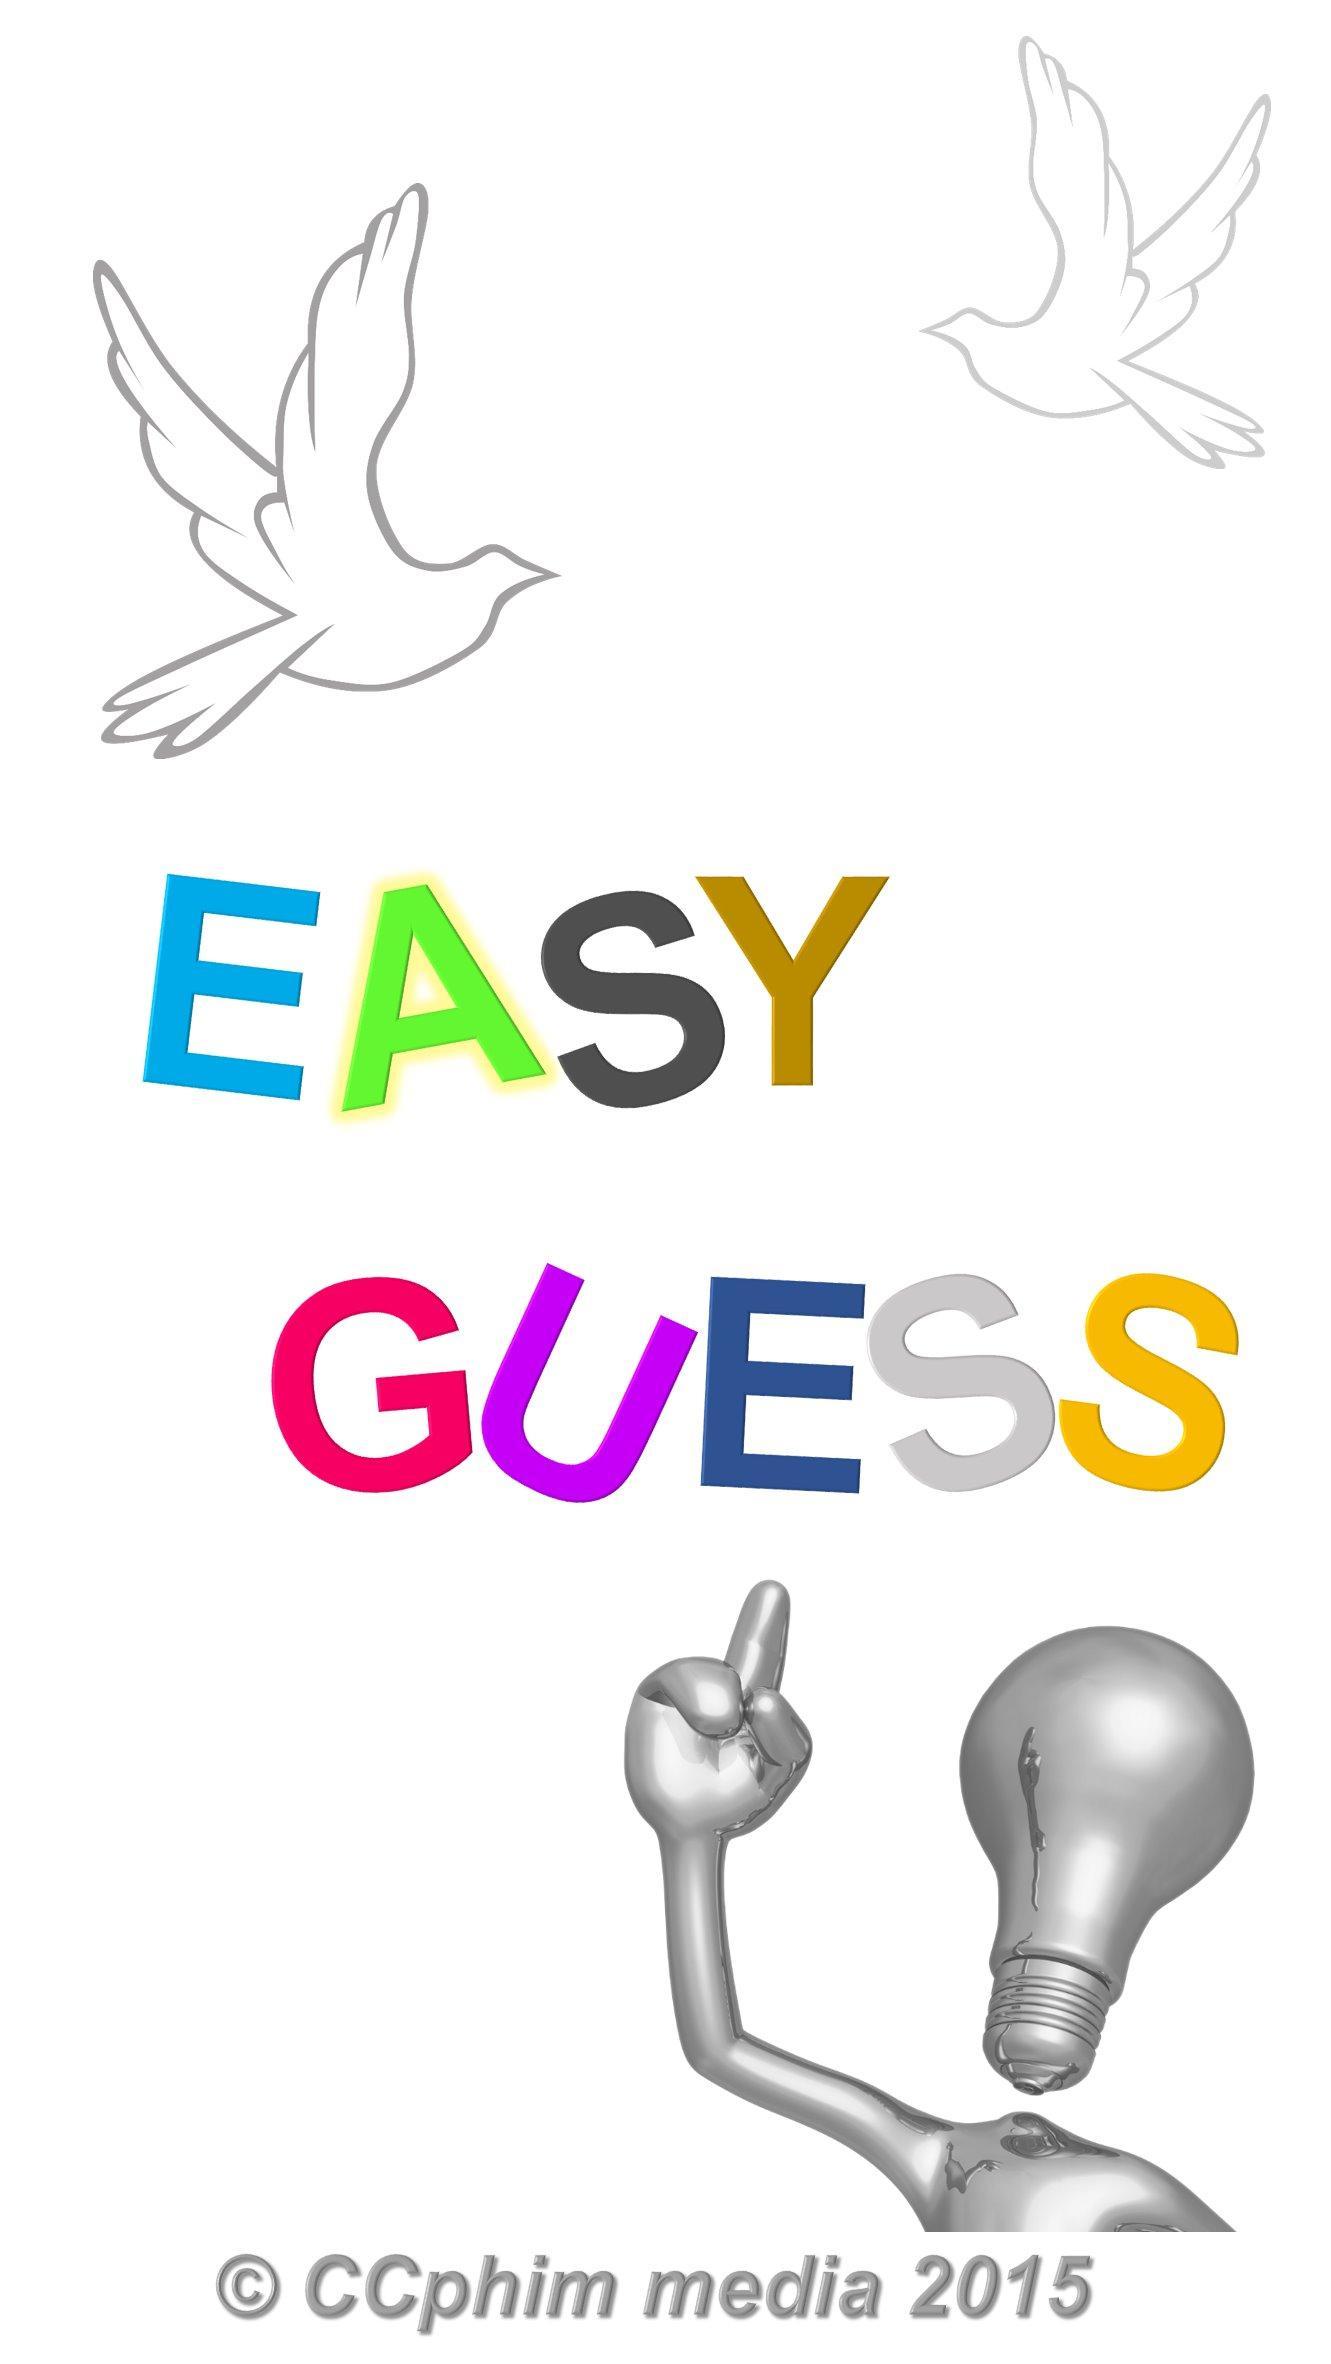 Easy Guess (Guess-A-Sketch) for Android - APK Download